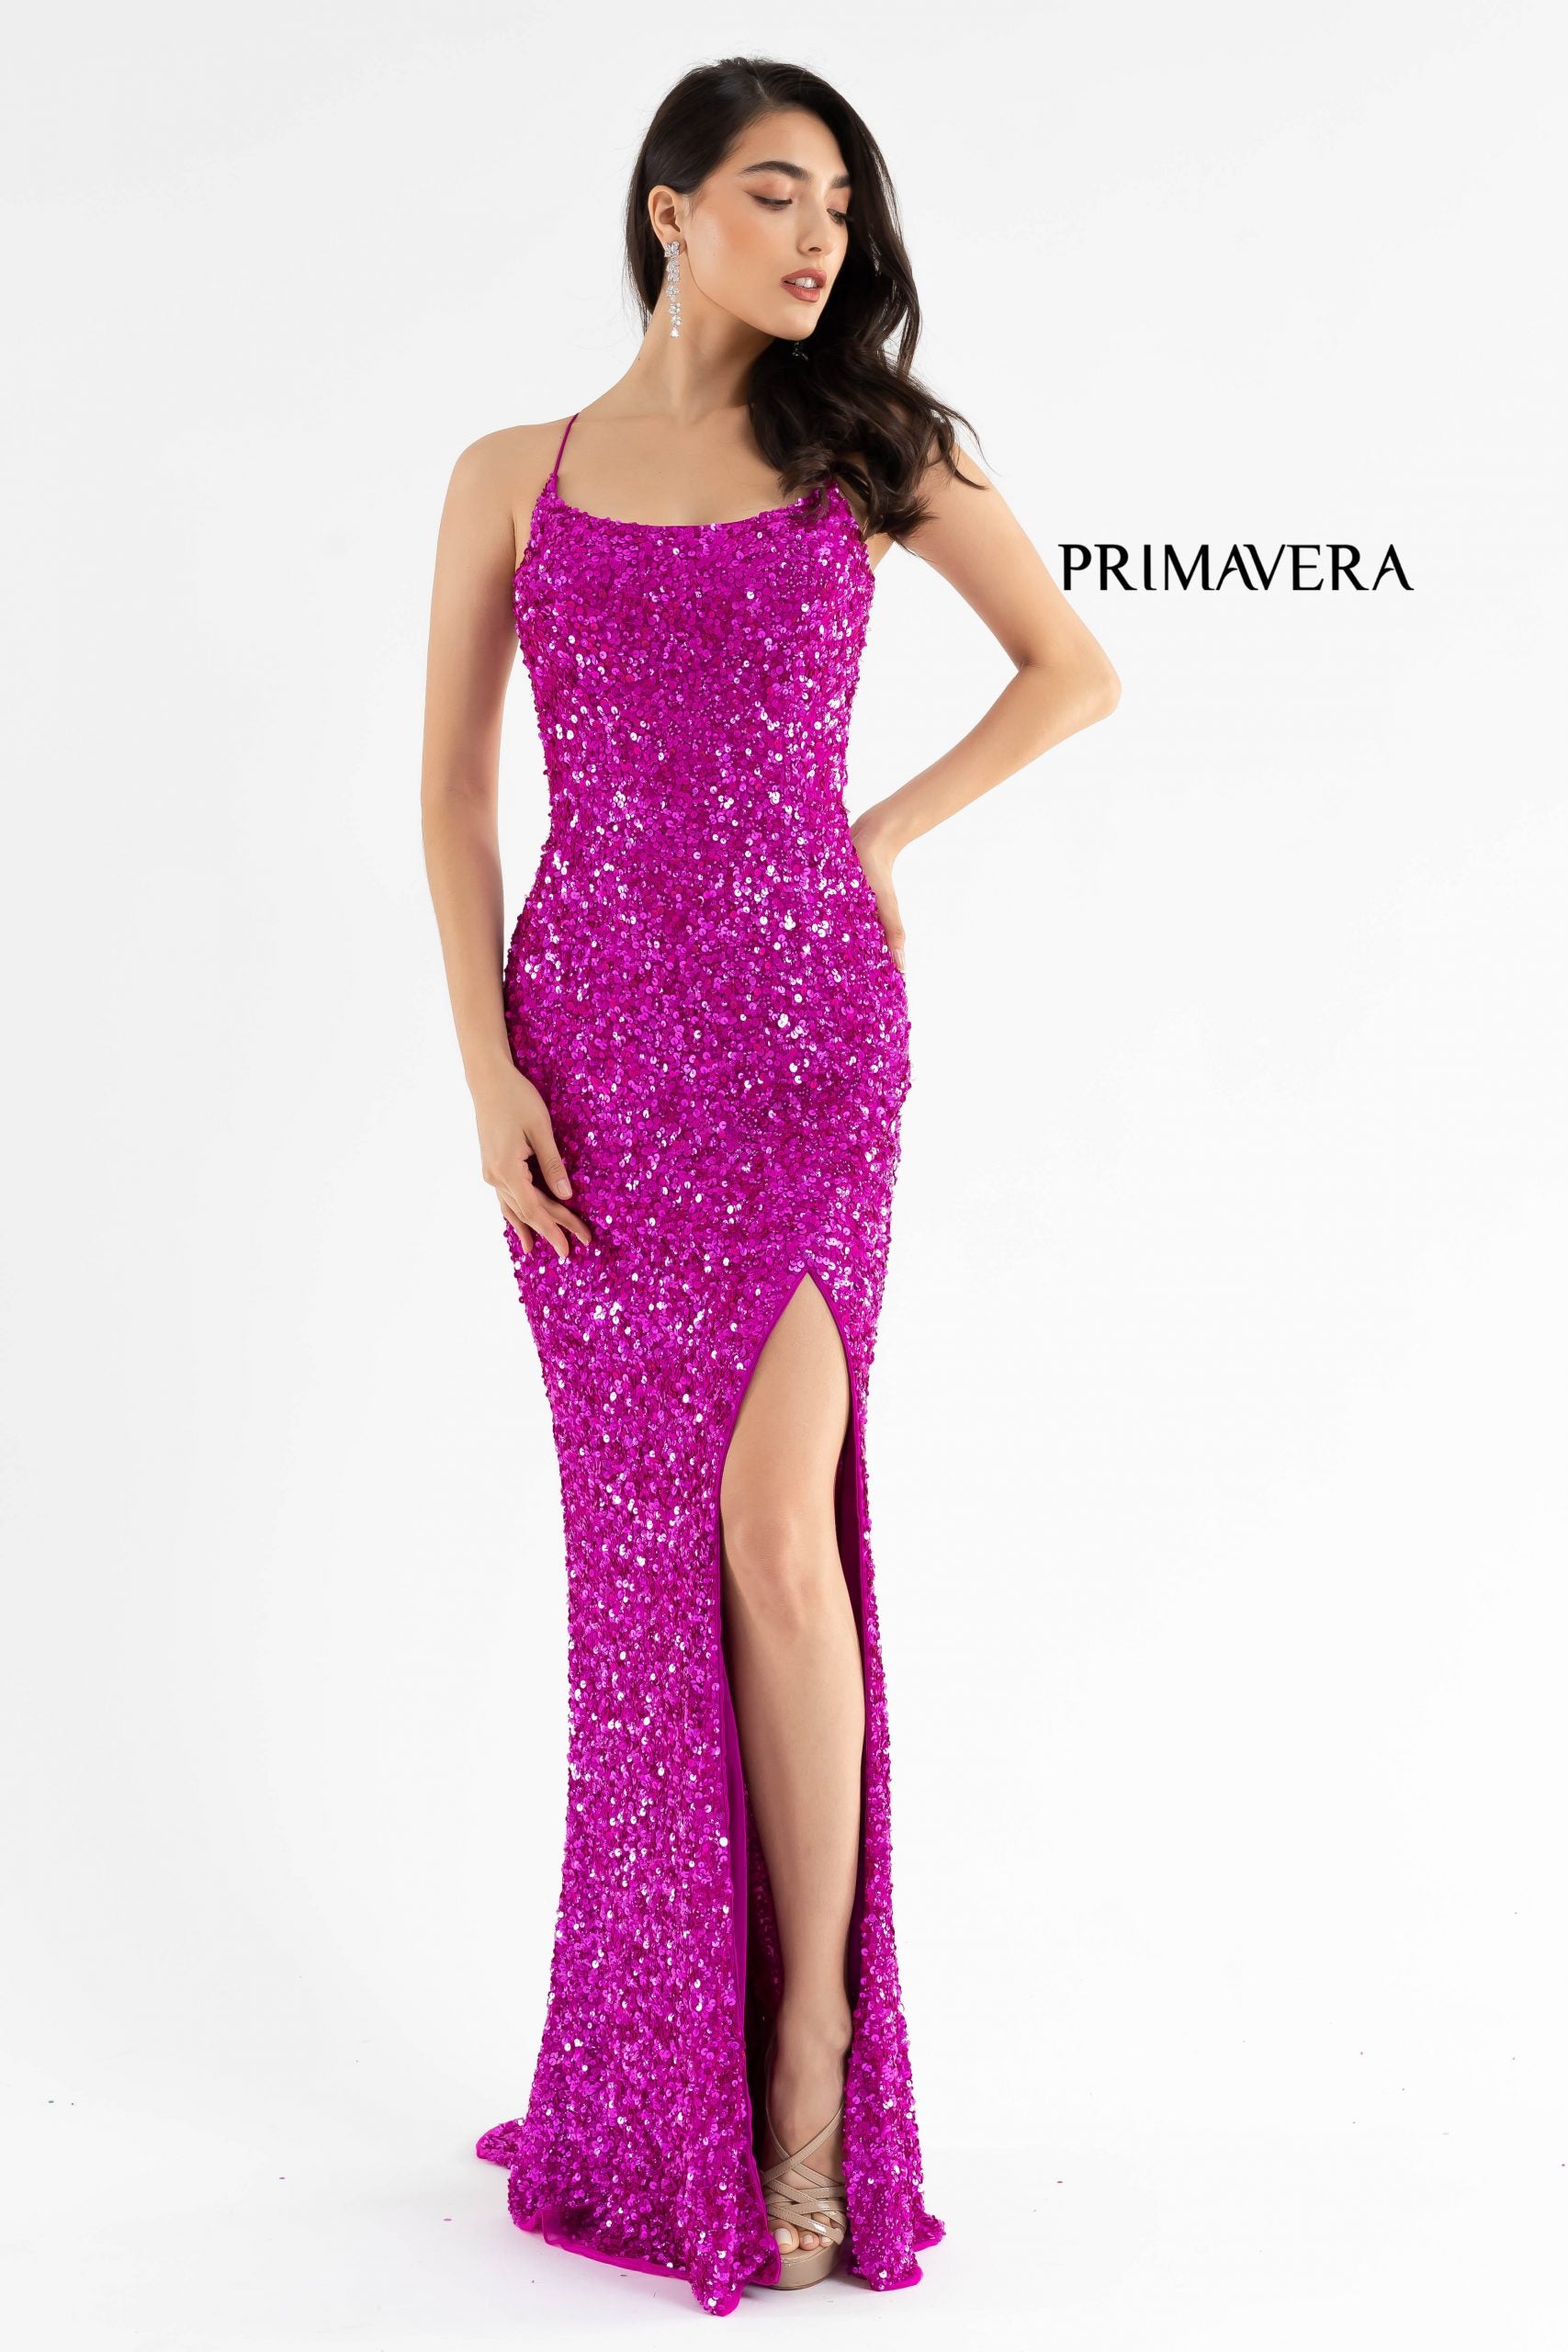 Primavera Couture 3290 This prom dress adds a pop to the multi sequins dress.  With a scoop neckline and spaghetti straps that cross and tie in the back.  This long evening dress has a side slit.  Available sizes:  000, 00, 0, 2, 4, 6, 8, 10, 12, 14, 16